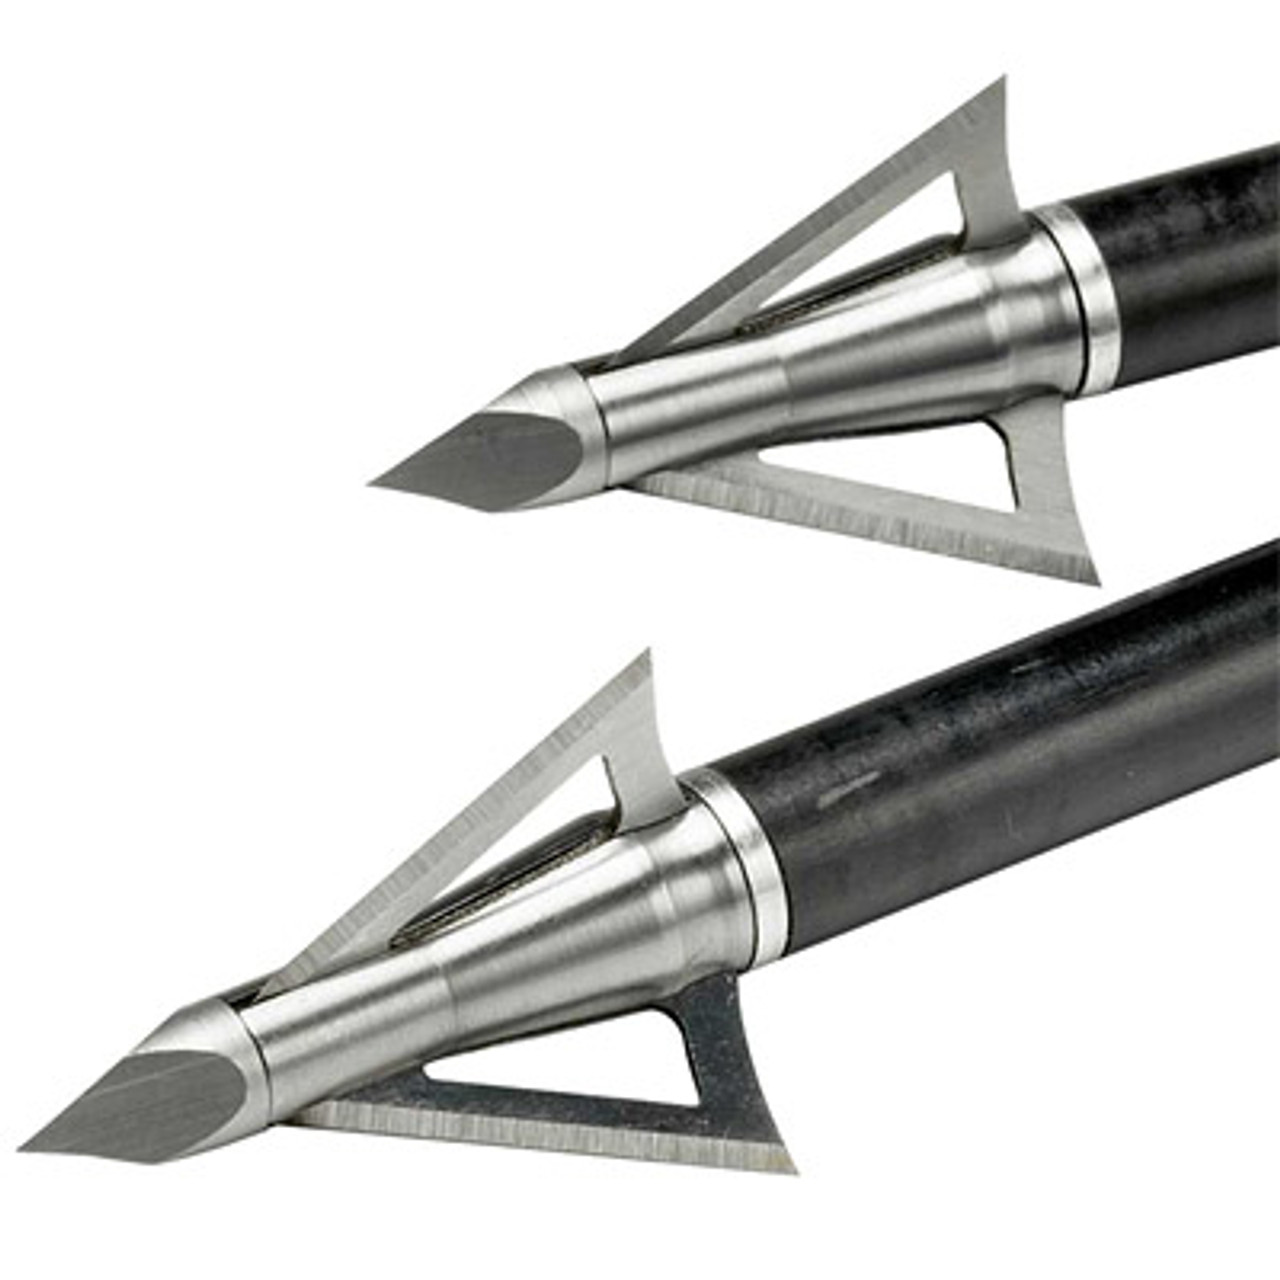 Boltcutter 150 gr Crossbow Broadheads by Excalibur